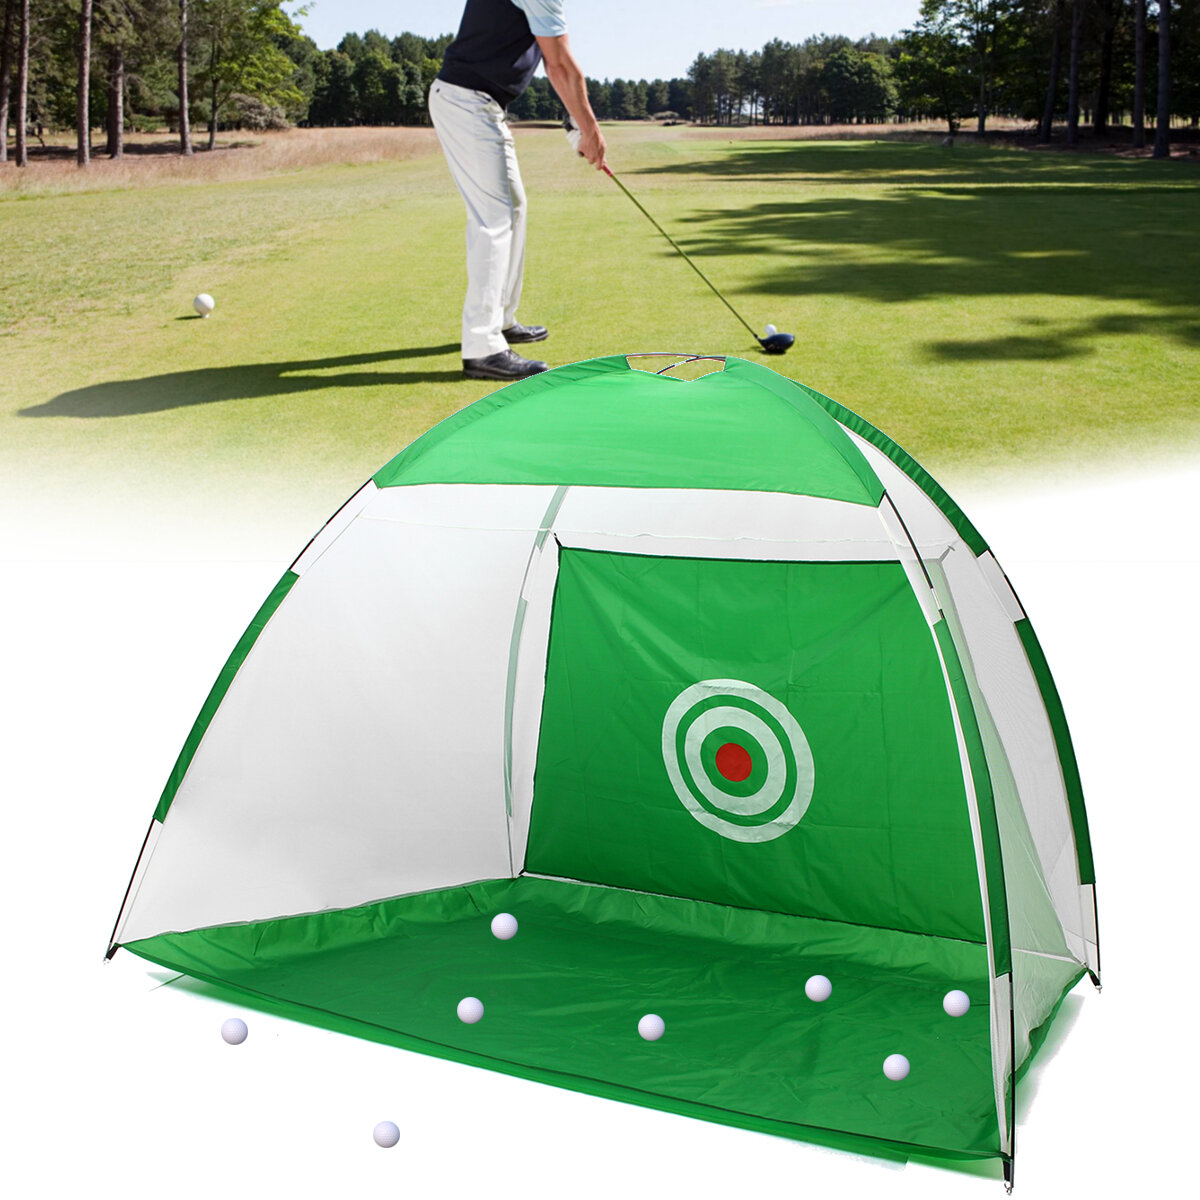 

3M Golf Training Net Portable Foldable Practice Golf Chipping Net Hitting Cage Trainer Indoor Outdoor Garden Grassland T